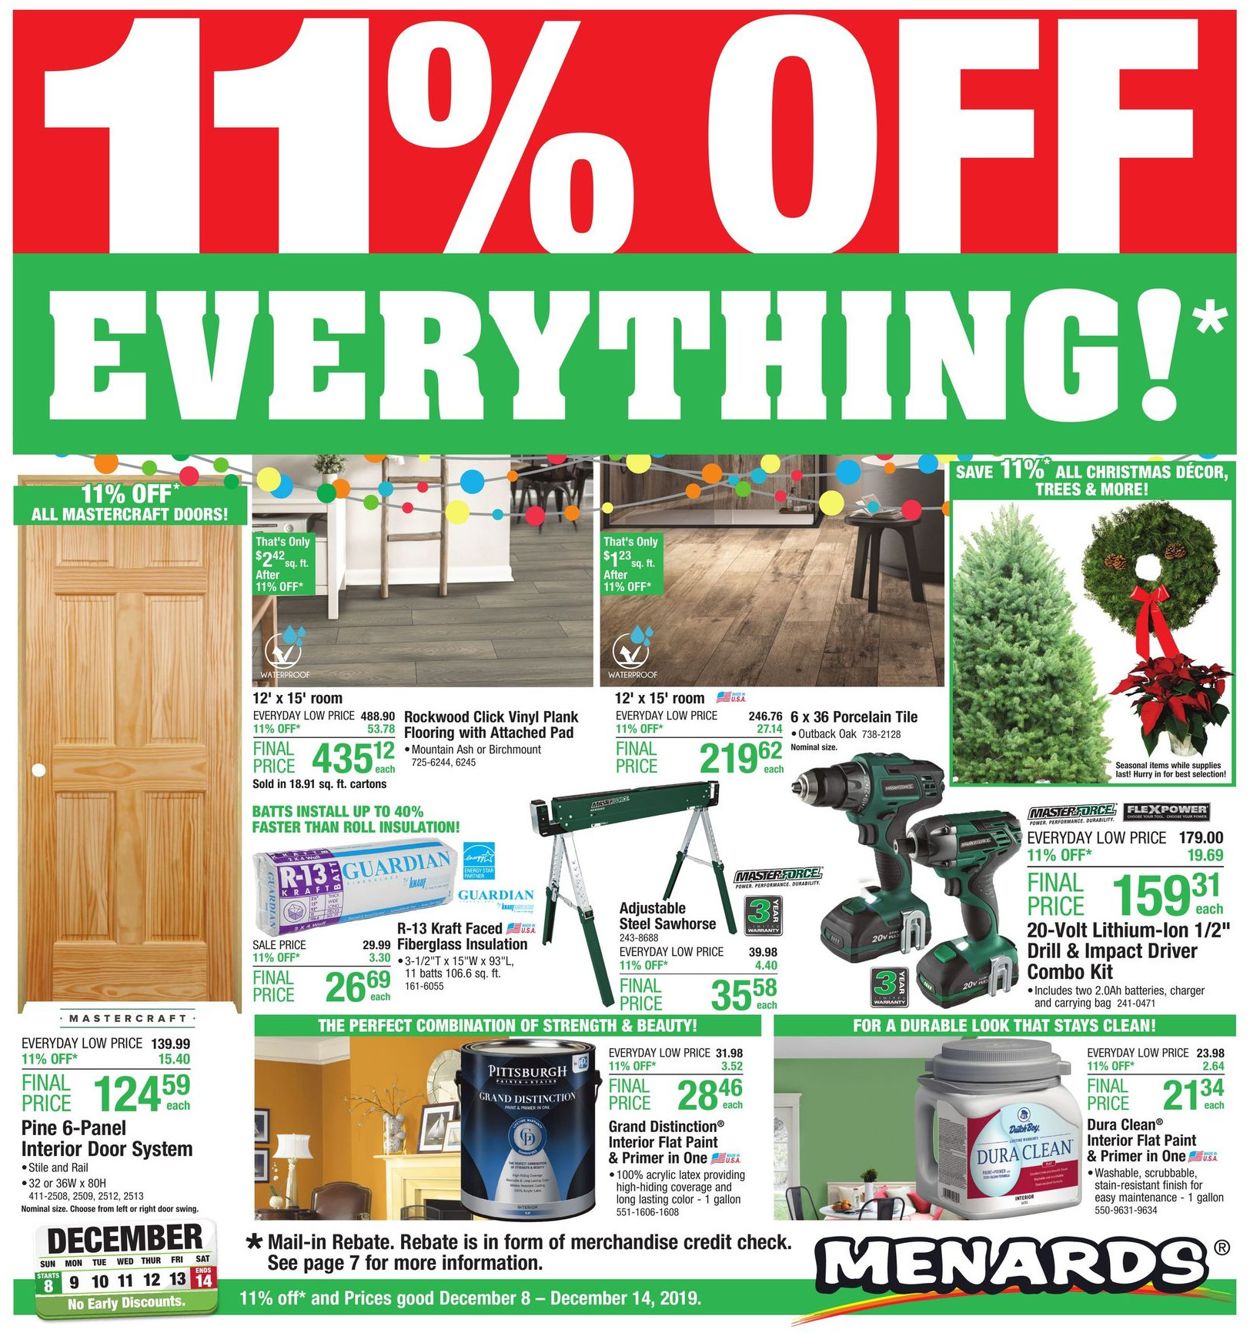 Menards - Holiday Ad 2019 Current weekly ad 12/08 - 12/14/2019 - www.bagsaleusa.com/product-category/twist-bag/